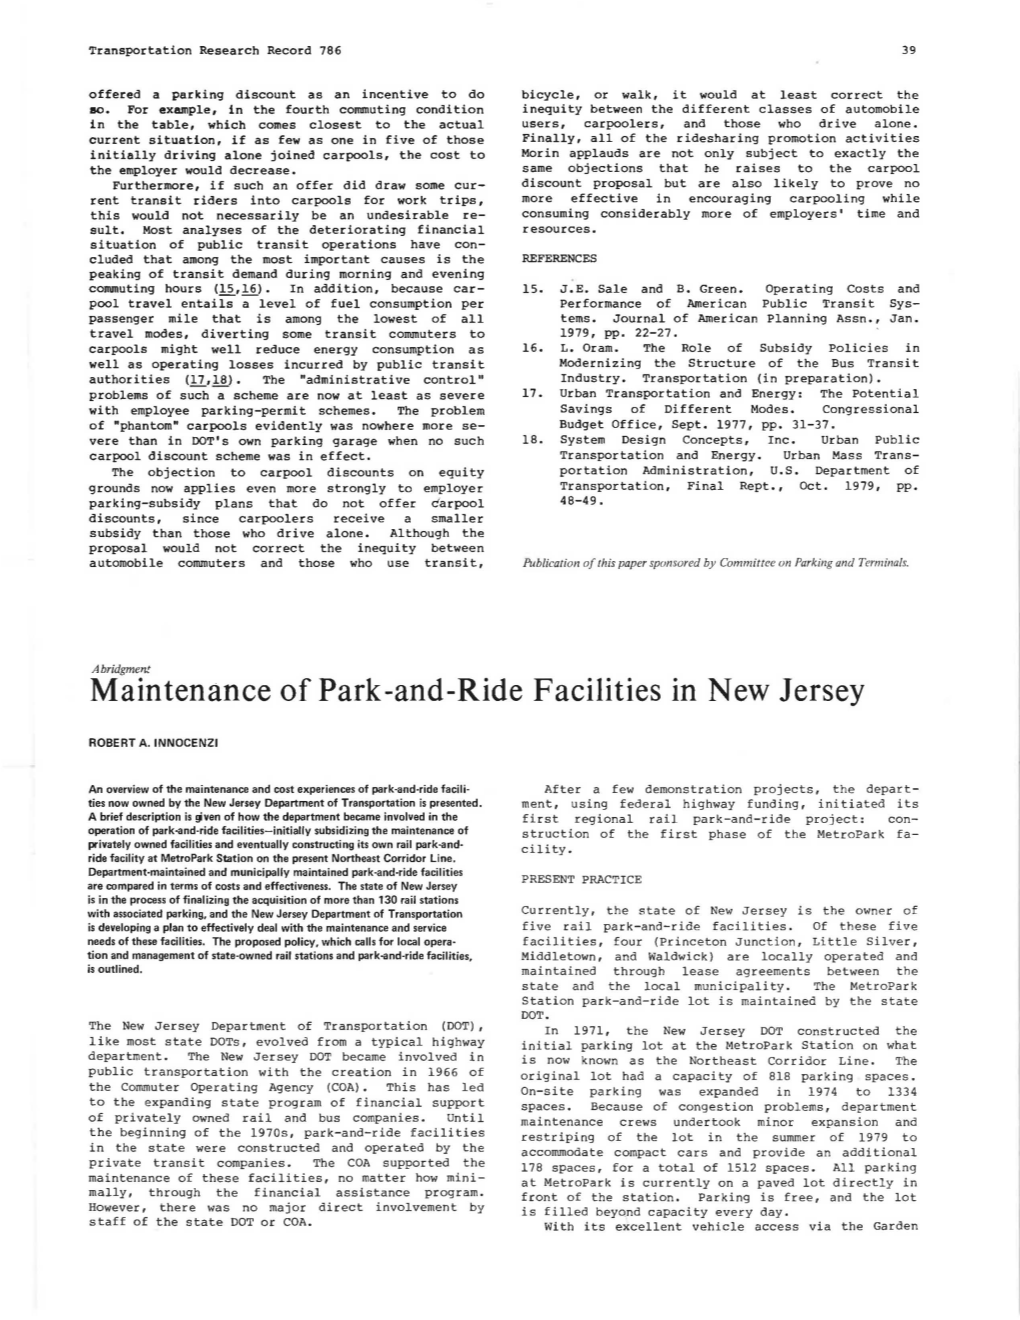 Maintenance of Park-And-Ride Facilities in New Jersey